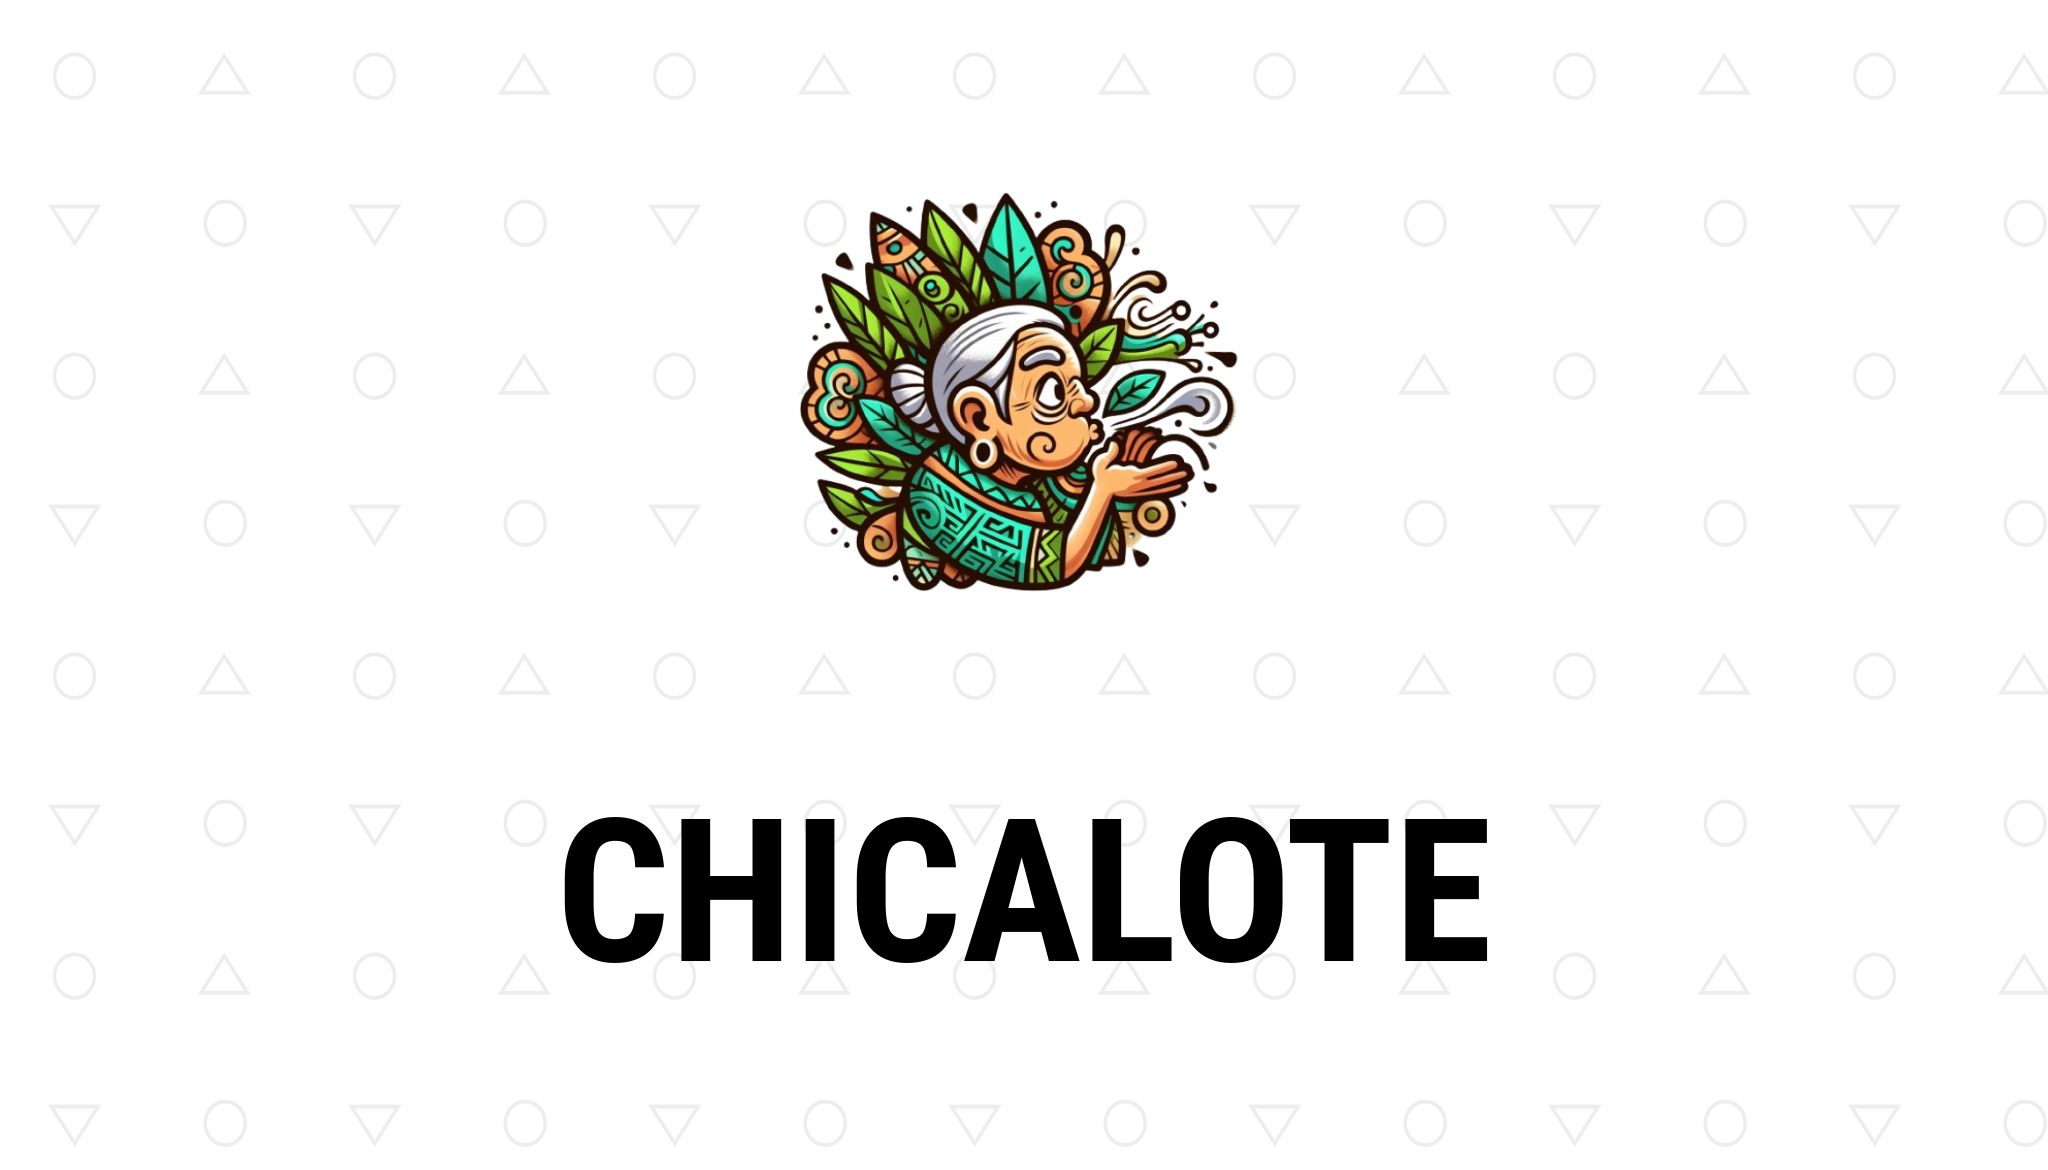 Chicalote